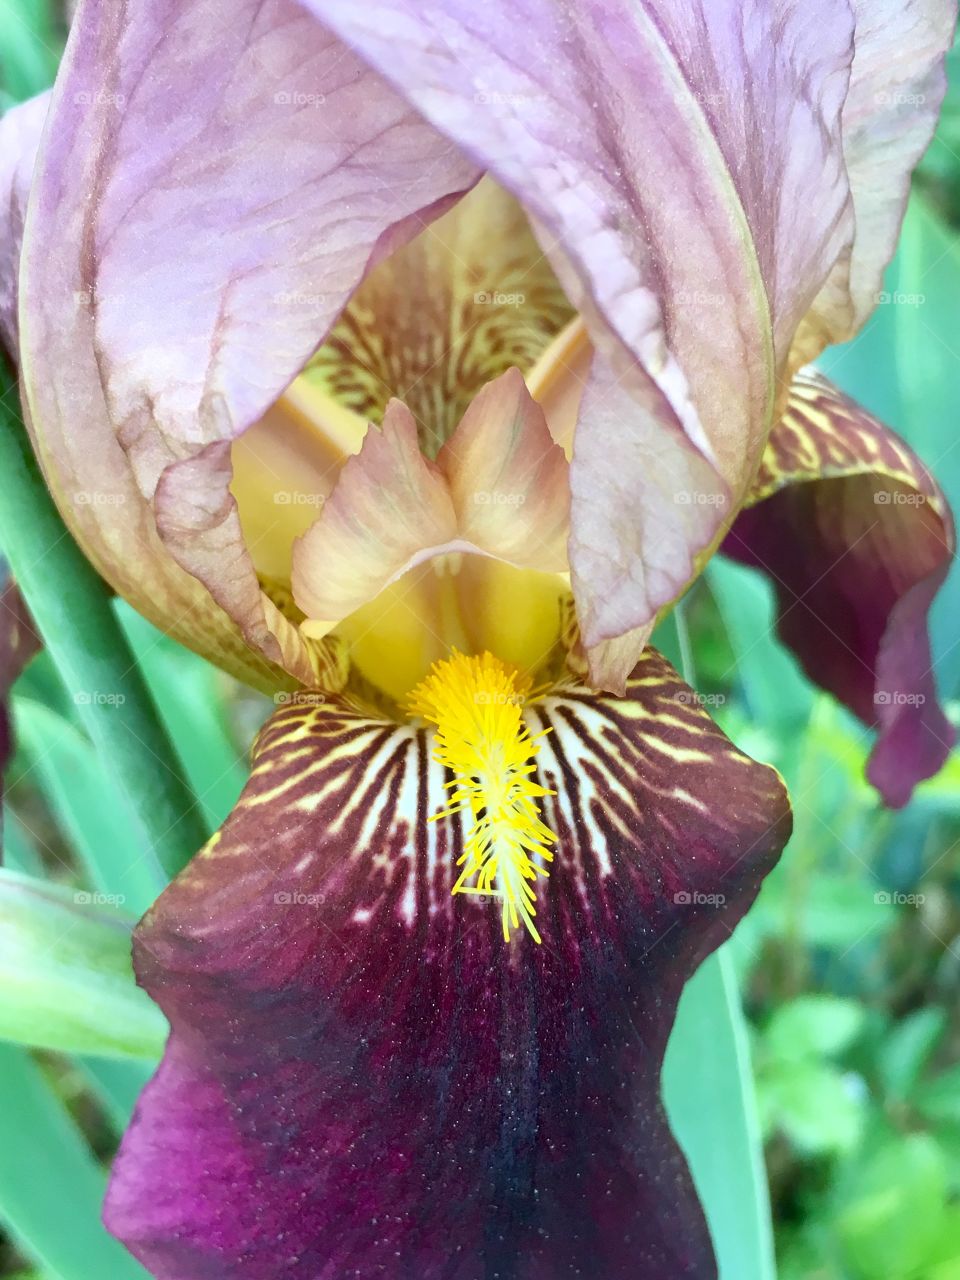 Beauty on the inside can sometimes be seen on the outside as well- especially on an iris! 